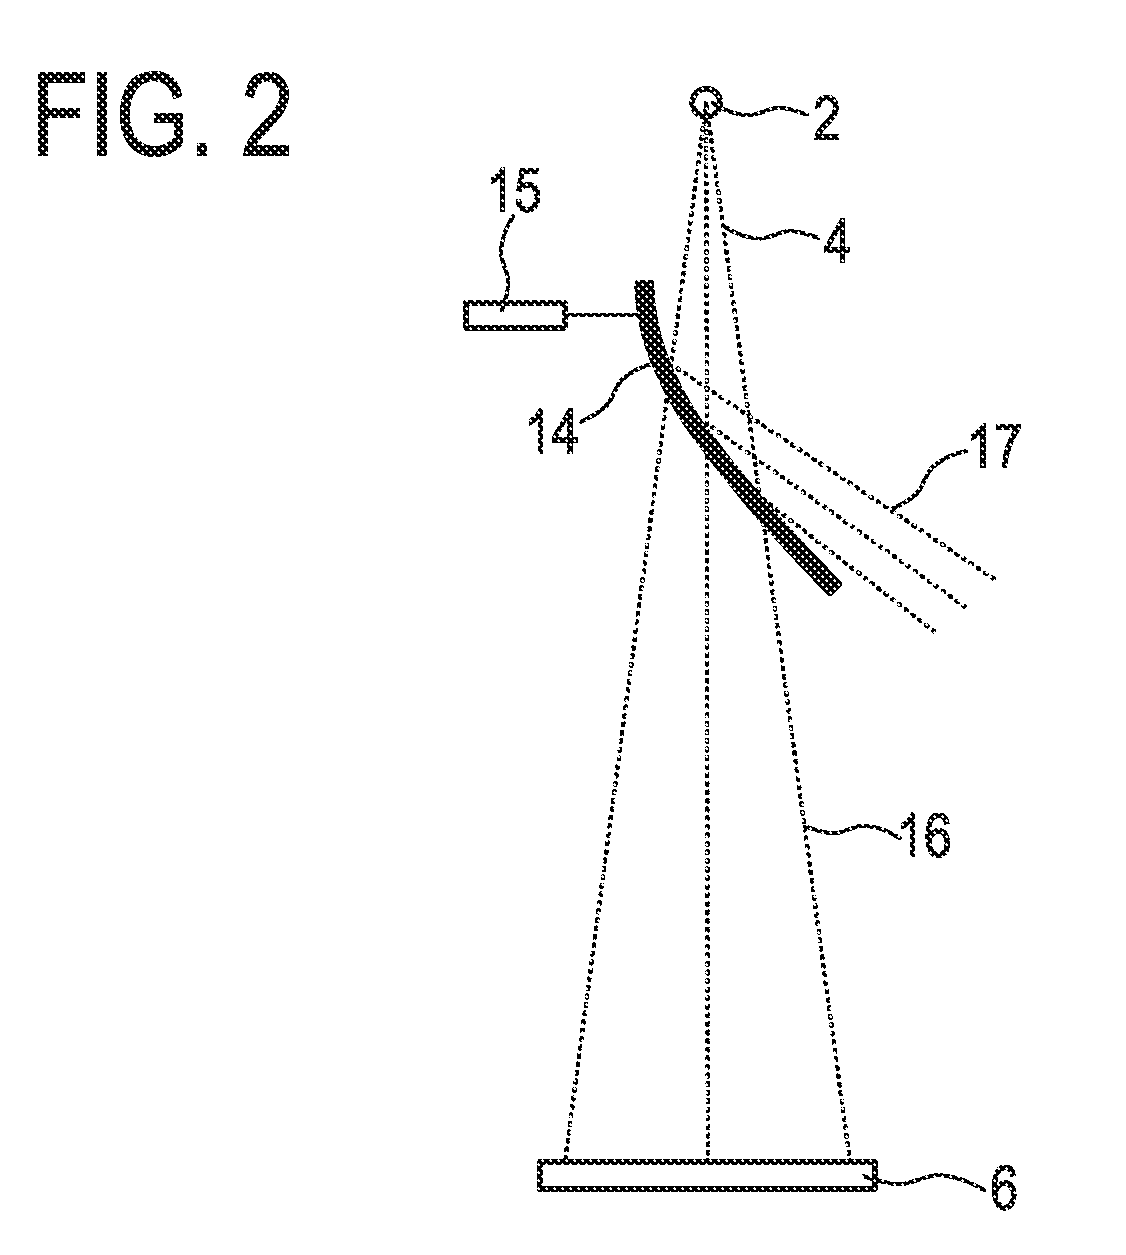 Medical X-ray examination apparatus and method for k-edge imaging